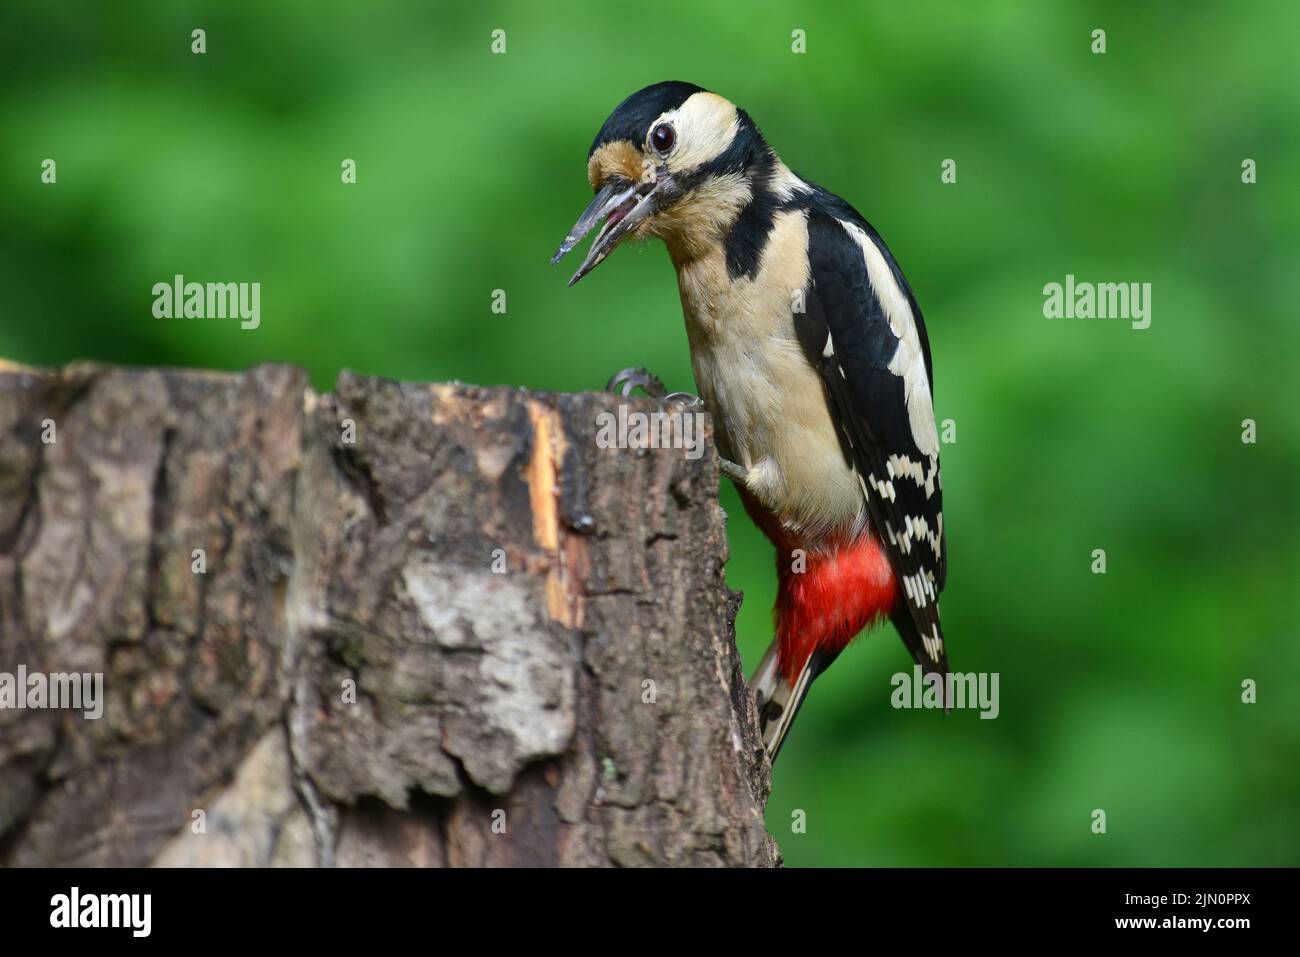 Adult female great spotted woodpecker at rest perched on tree stump. Stock Photo